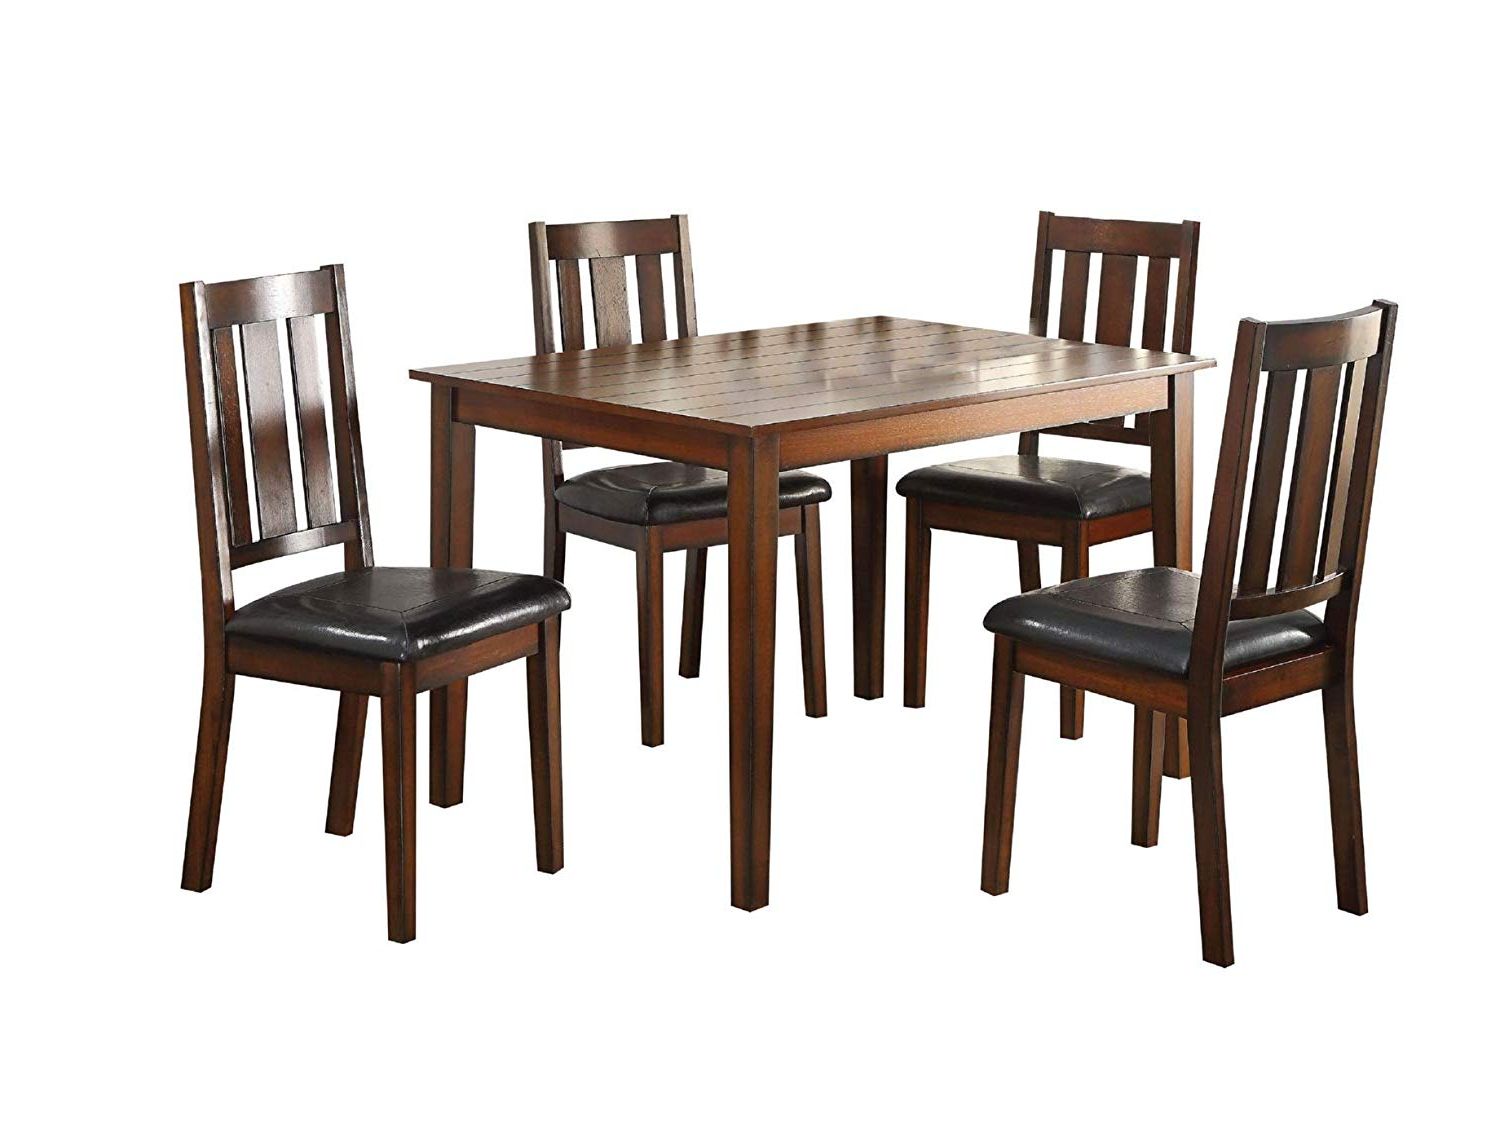 Transitional 4 Seating Square Casual Dining Tables Inside 2017 Amazon – Major Q 5pc Pack Transitional Style Casual (View 7 of 30)